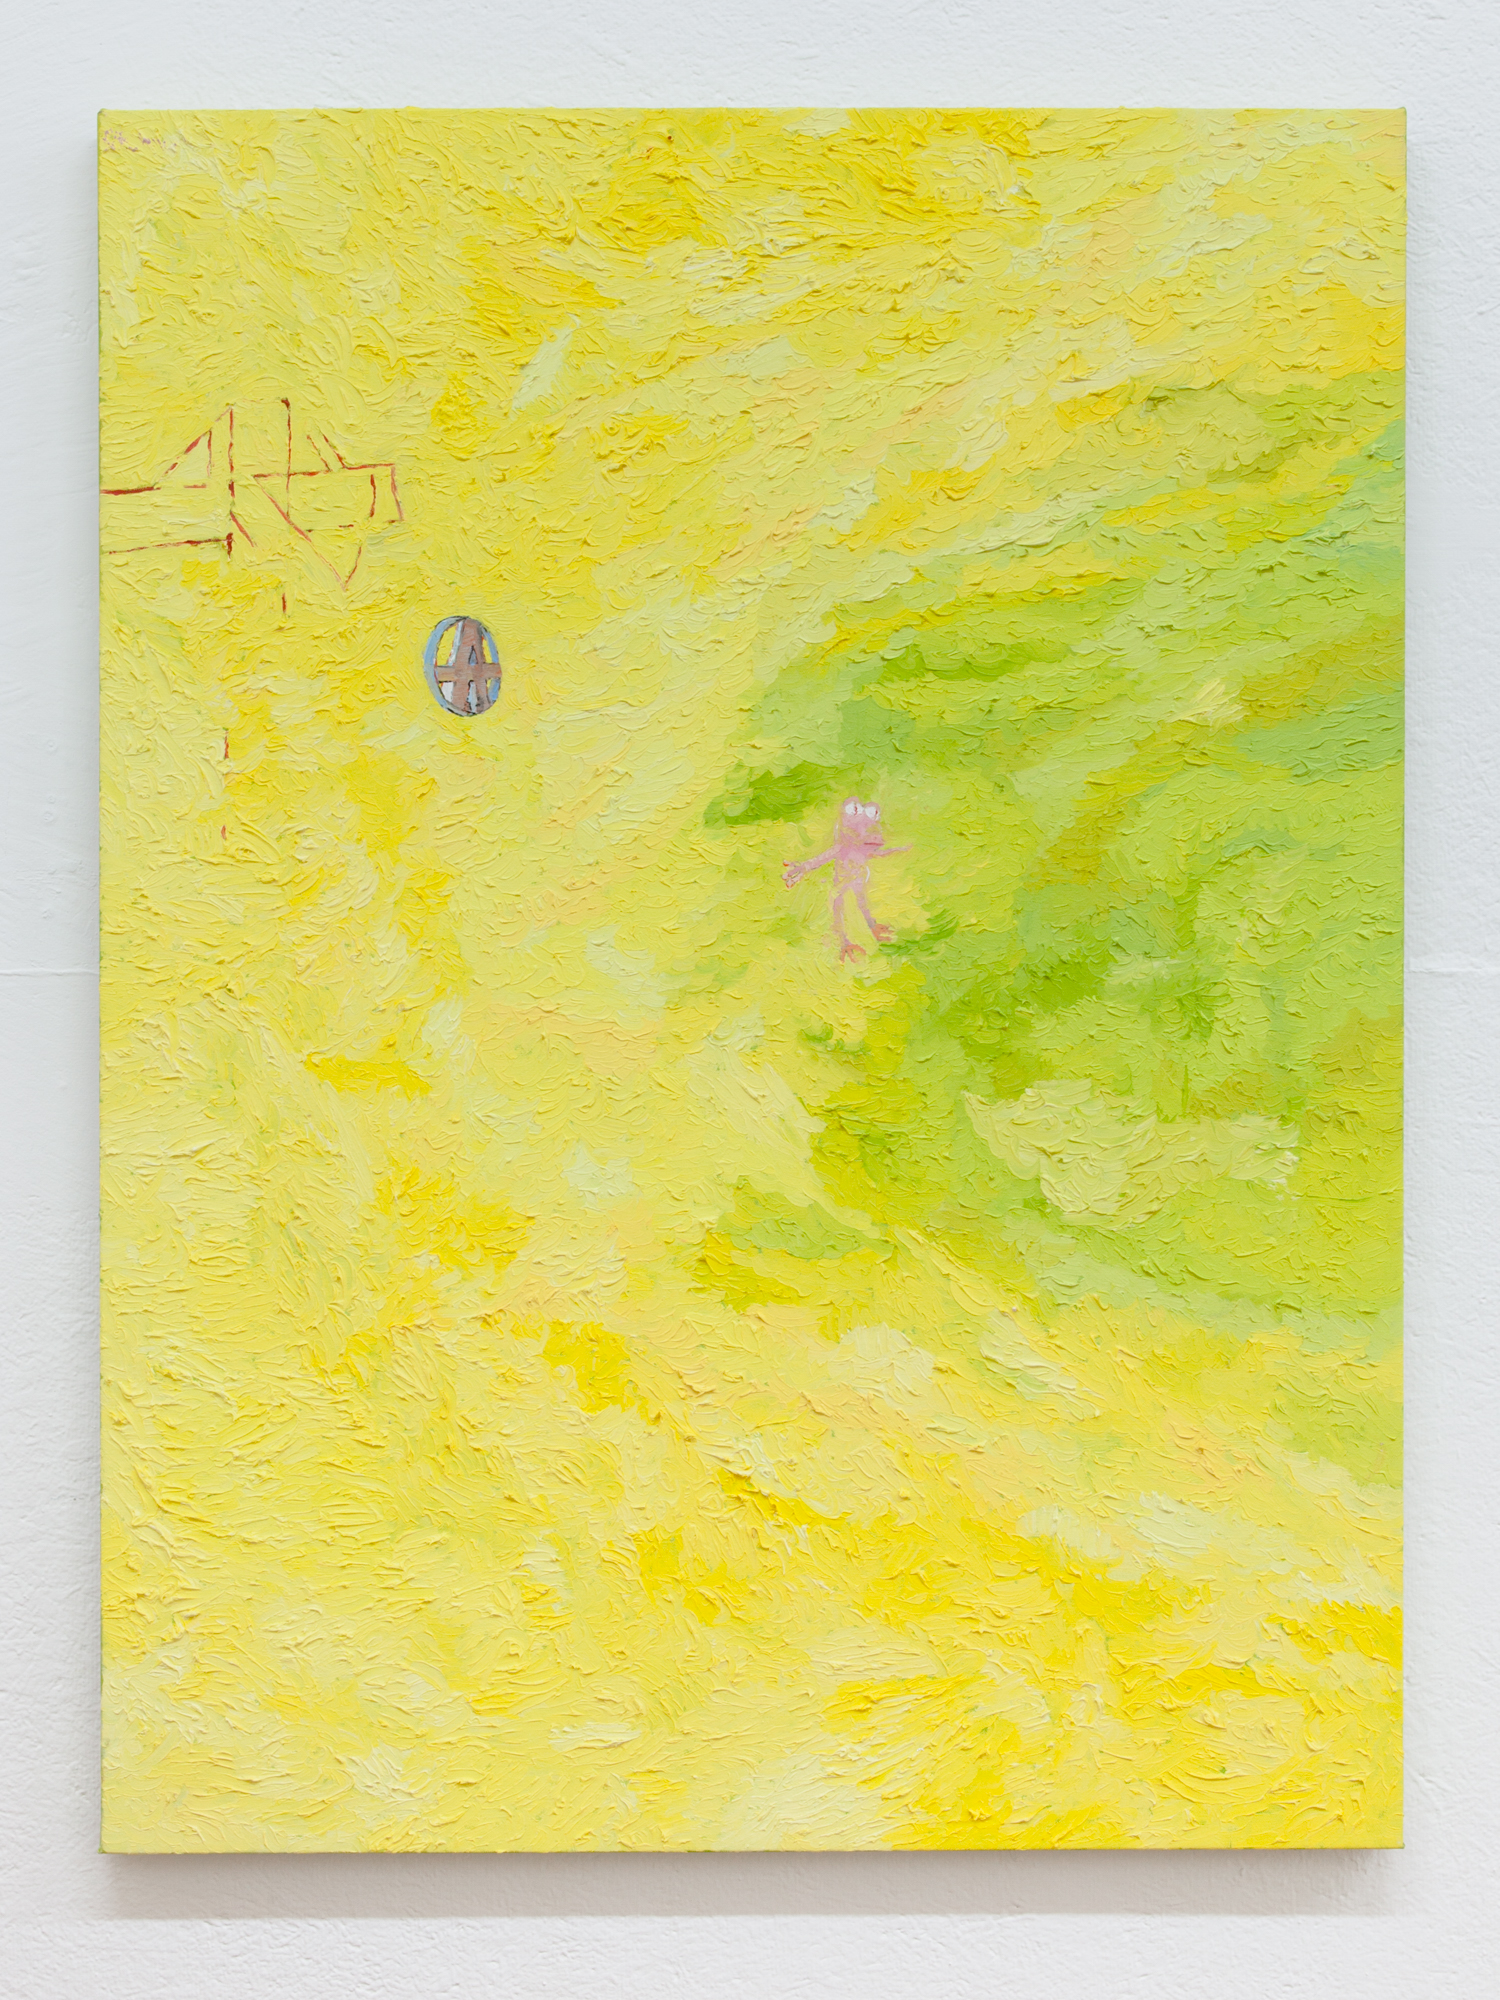  Jesse Sullivan,  Piss Frog , 2017, Oil on Canvas, 40 x 30 inches 